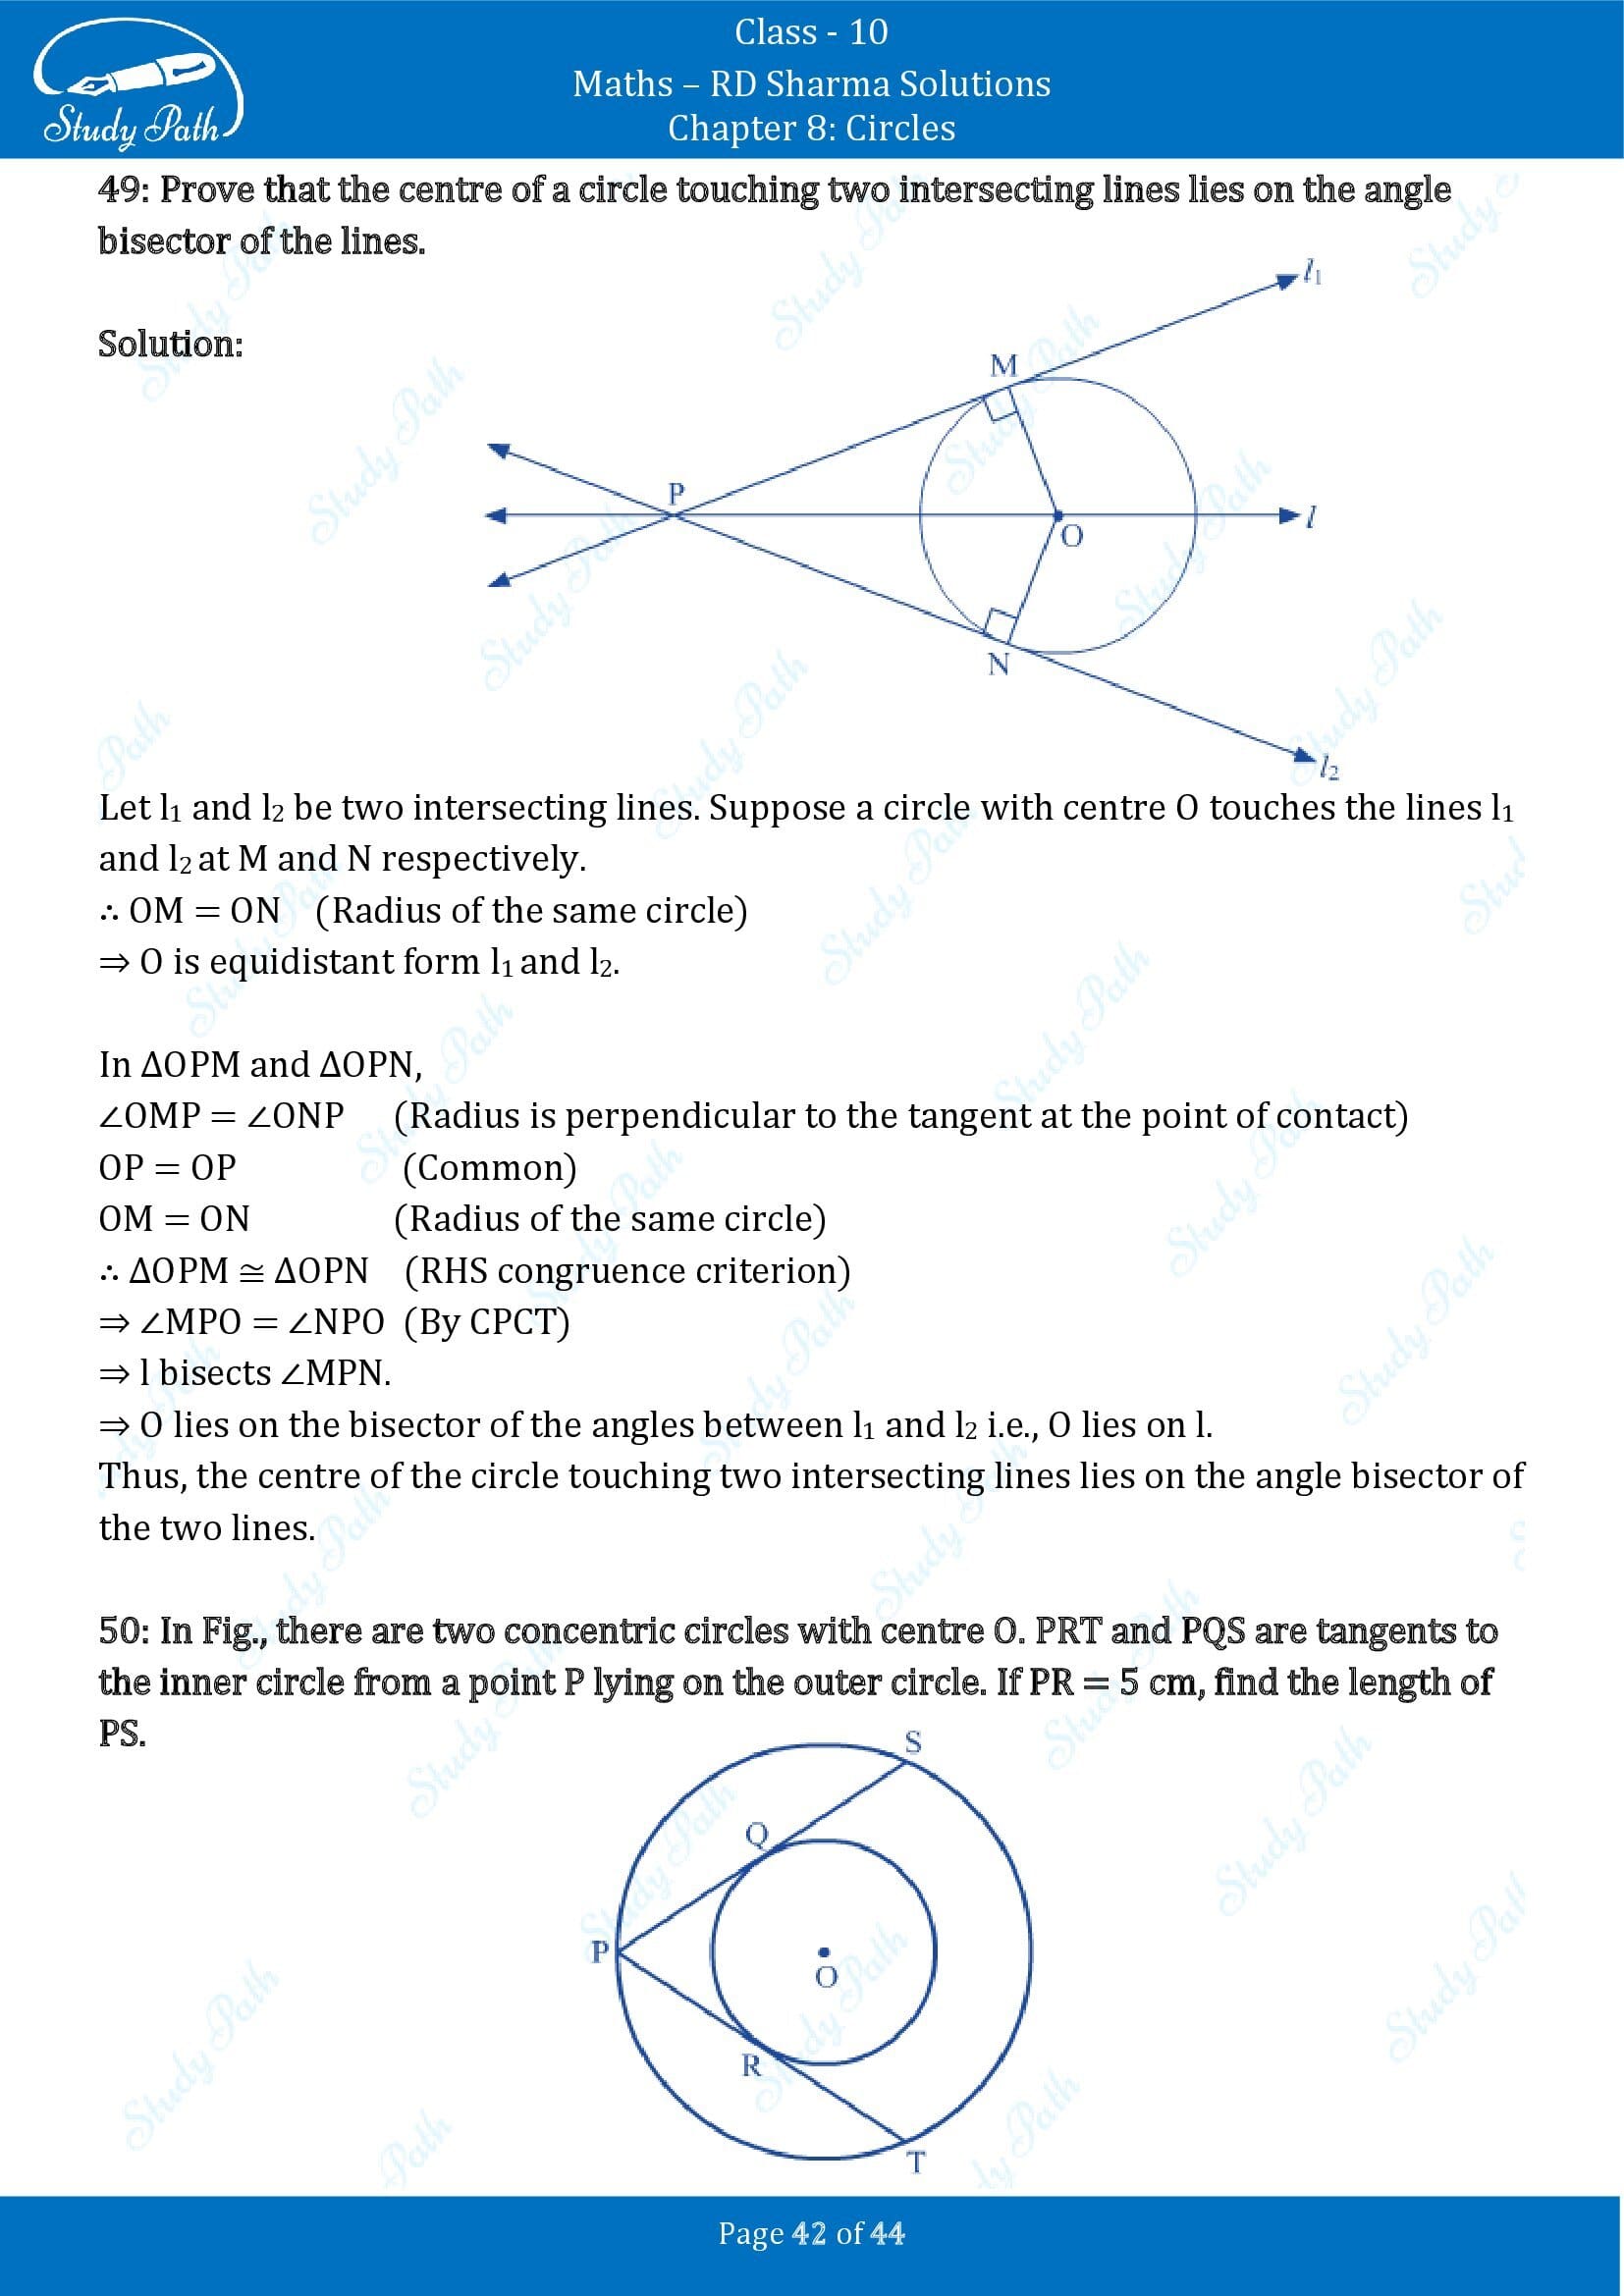 RD Sharma Solutions Class 10 Chapter 8 Circles Exercise 8.2 00042